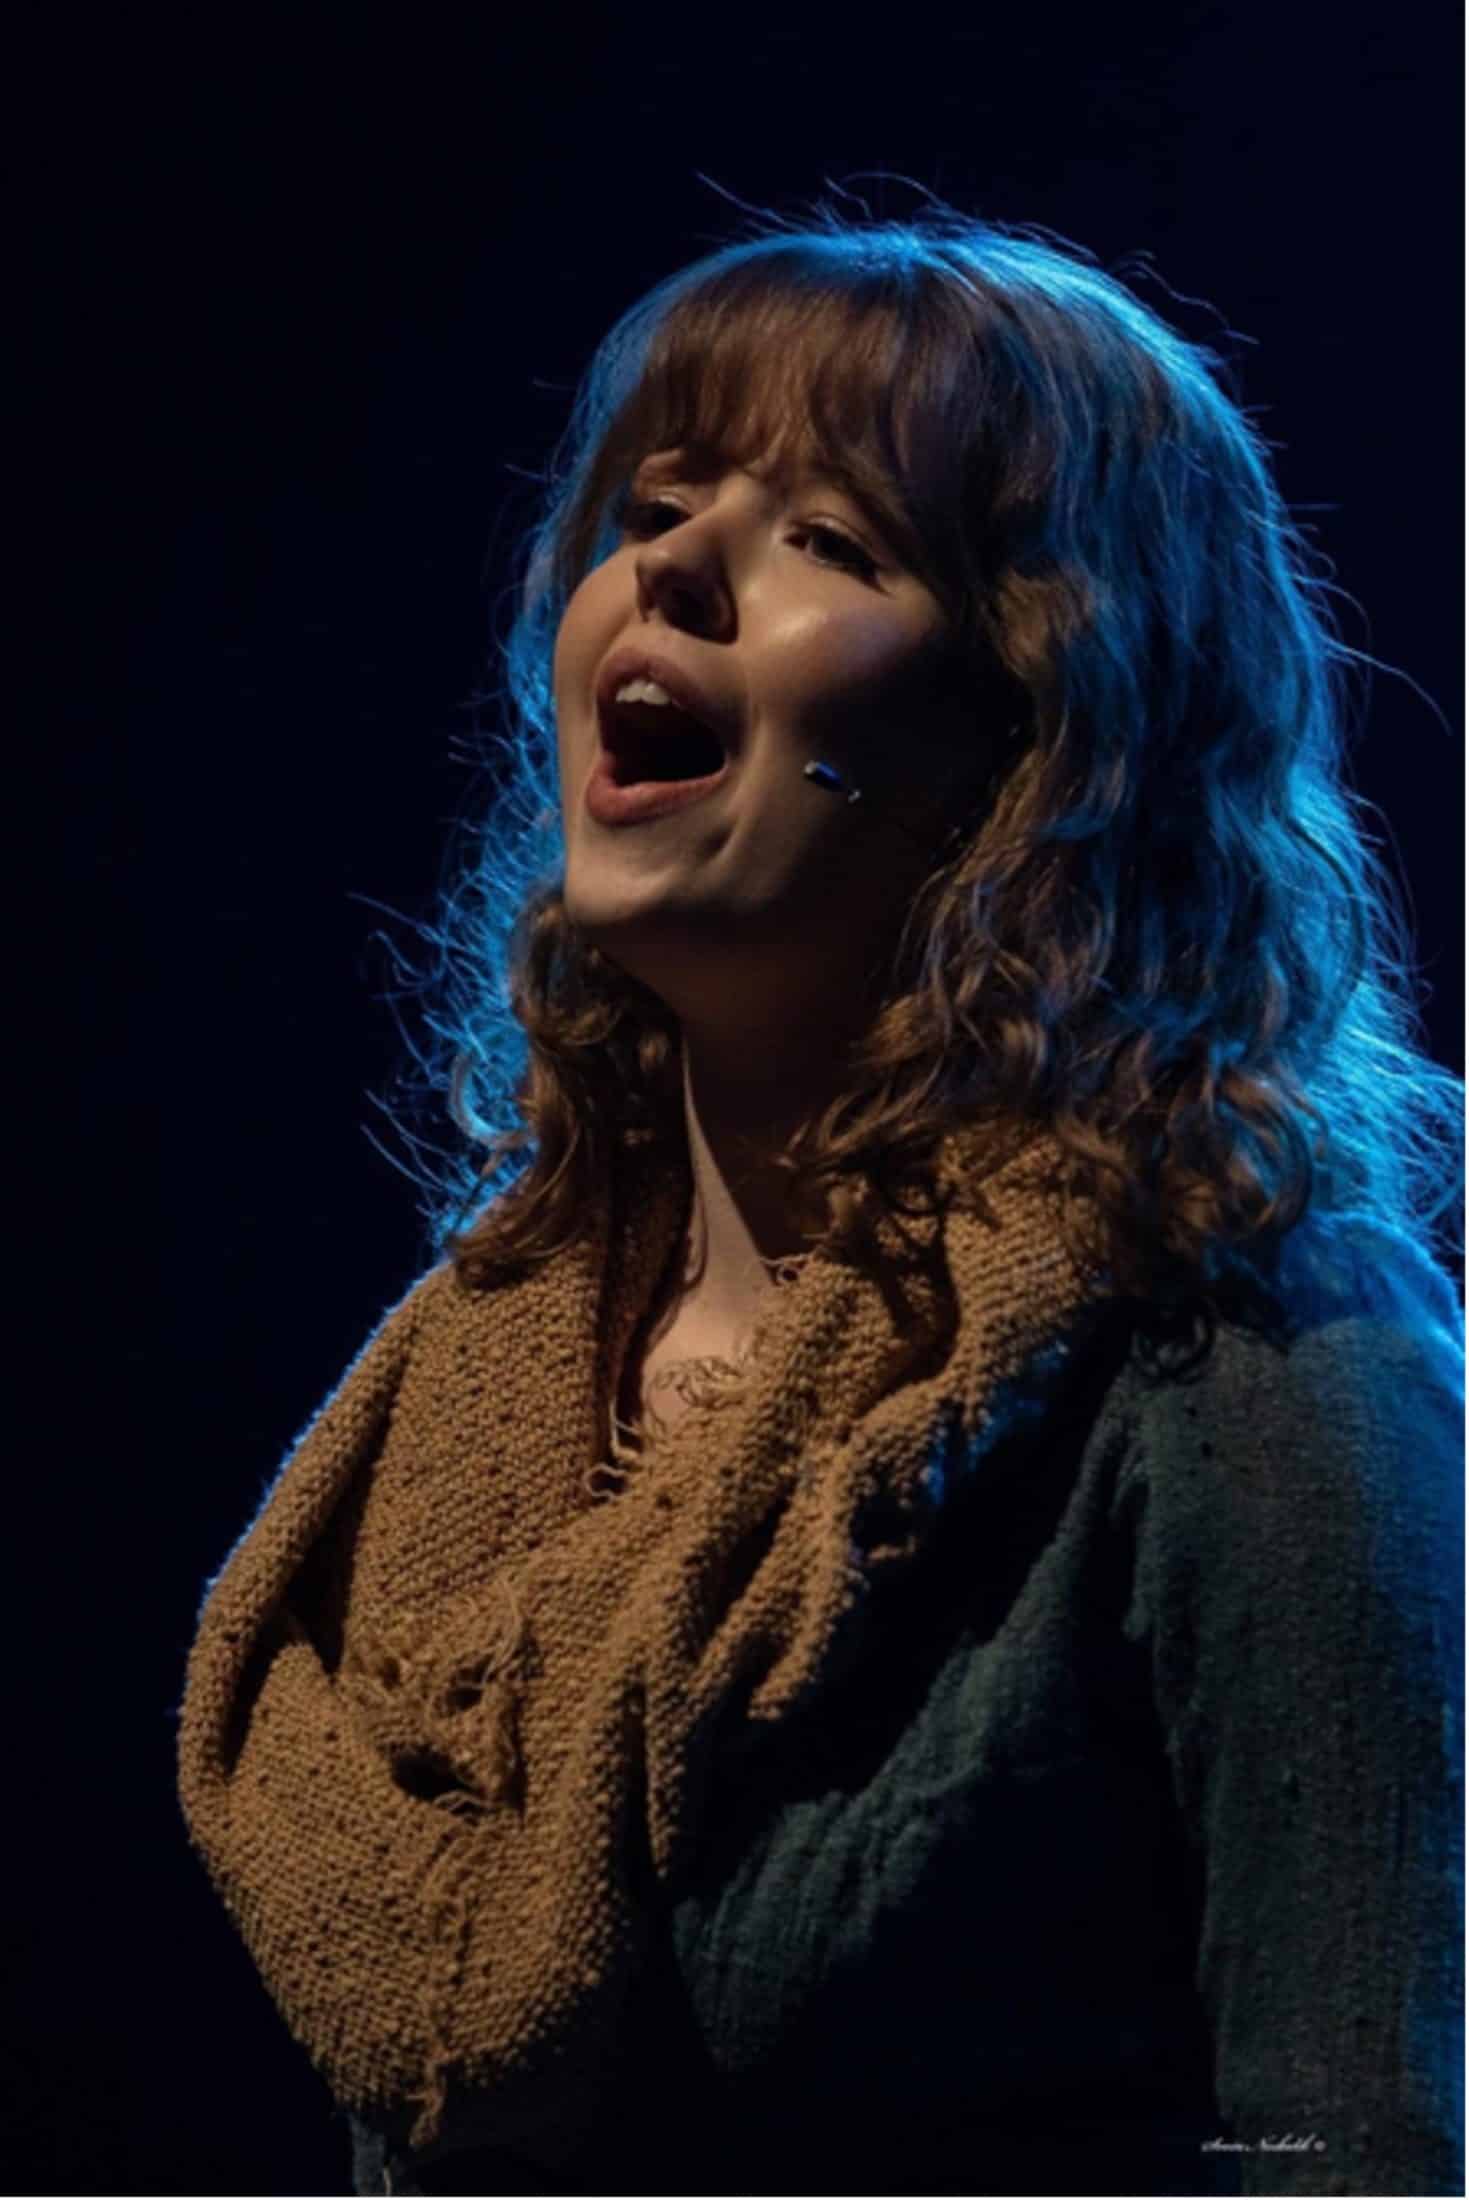 Portrait of Eline Jacobsen singing with black background and blue lighting on her hair 